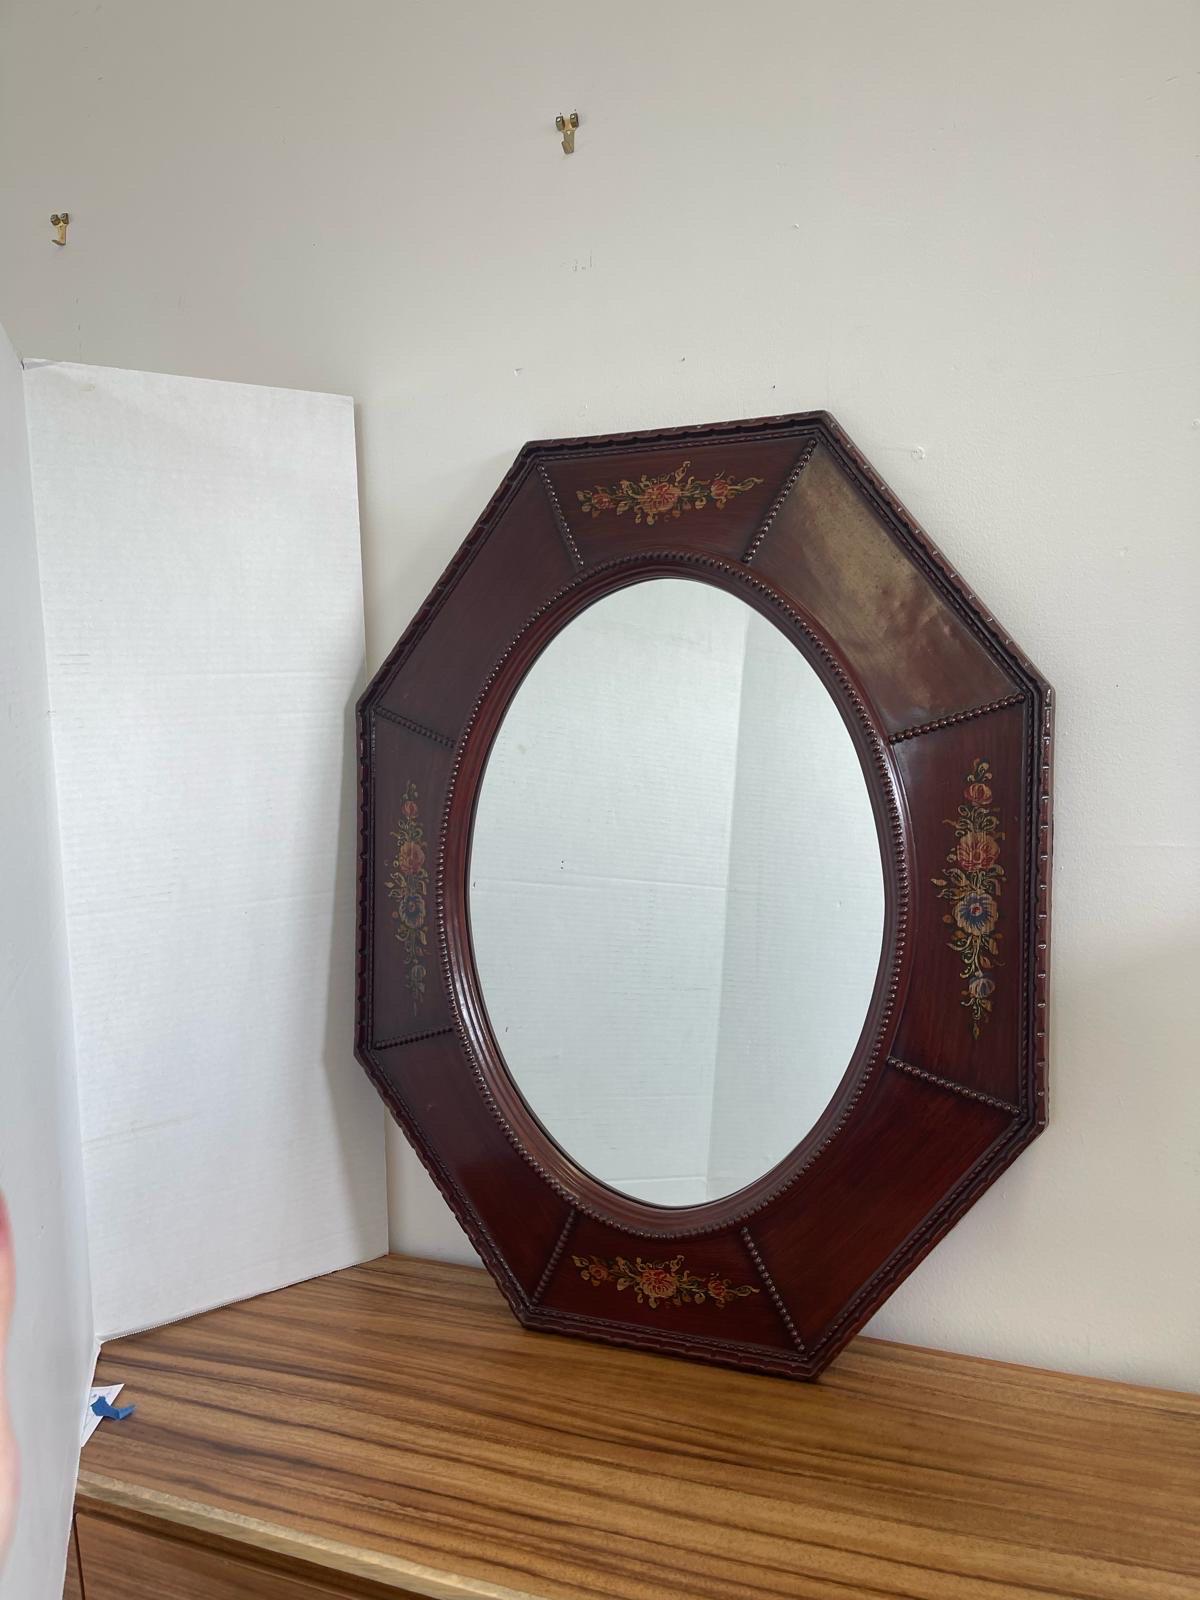 The Mirror itself Is Oval Shaped with an Octagonal Frame. Hand Painted Floral Design on Four Sides. Makers Mark on the Back as Pictured. Vintage Condition Consistent with Age as Pictured.

Dimensions. 34 W ; 1 D ; 26 1/2 H